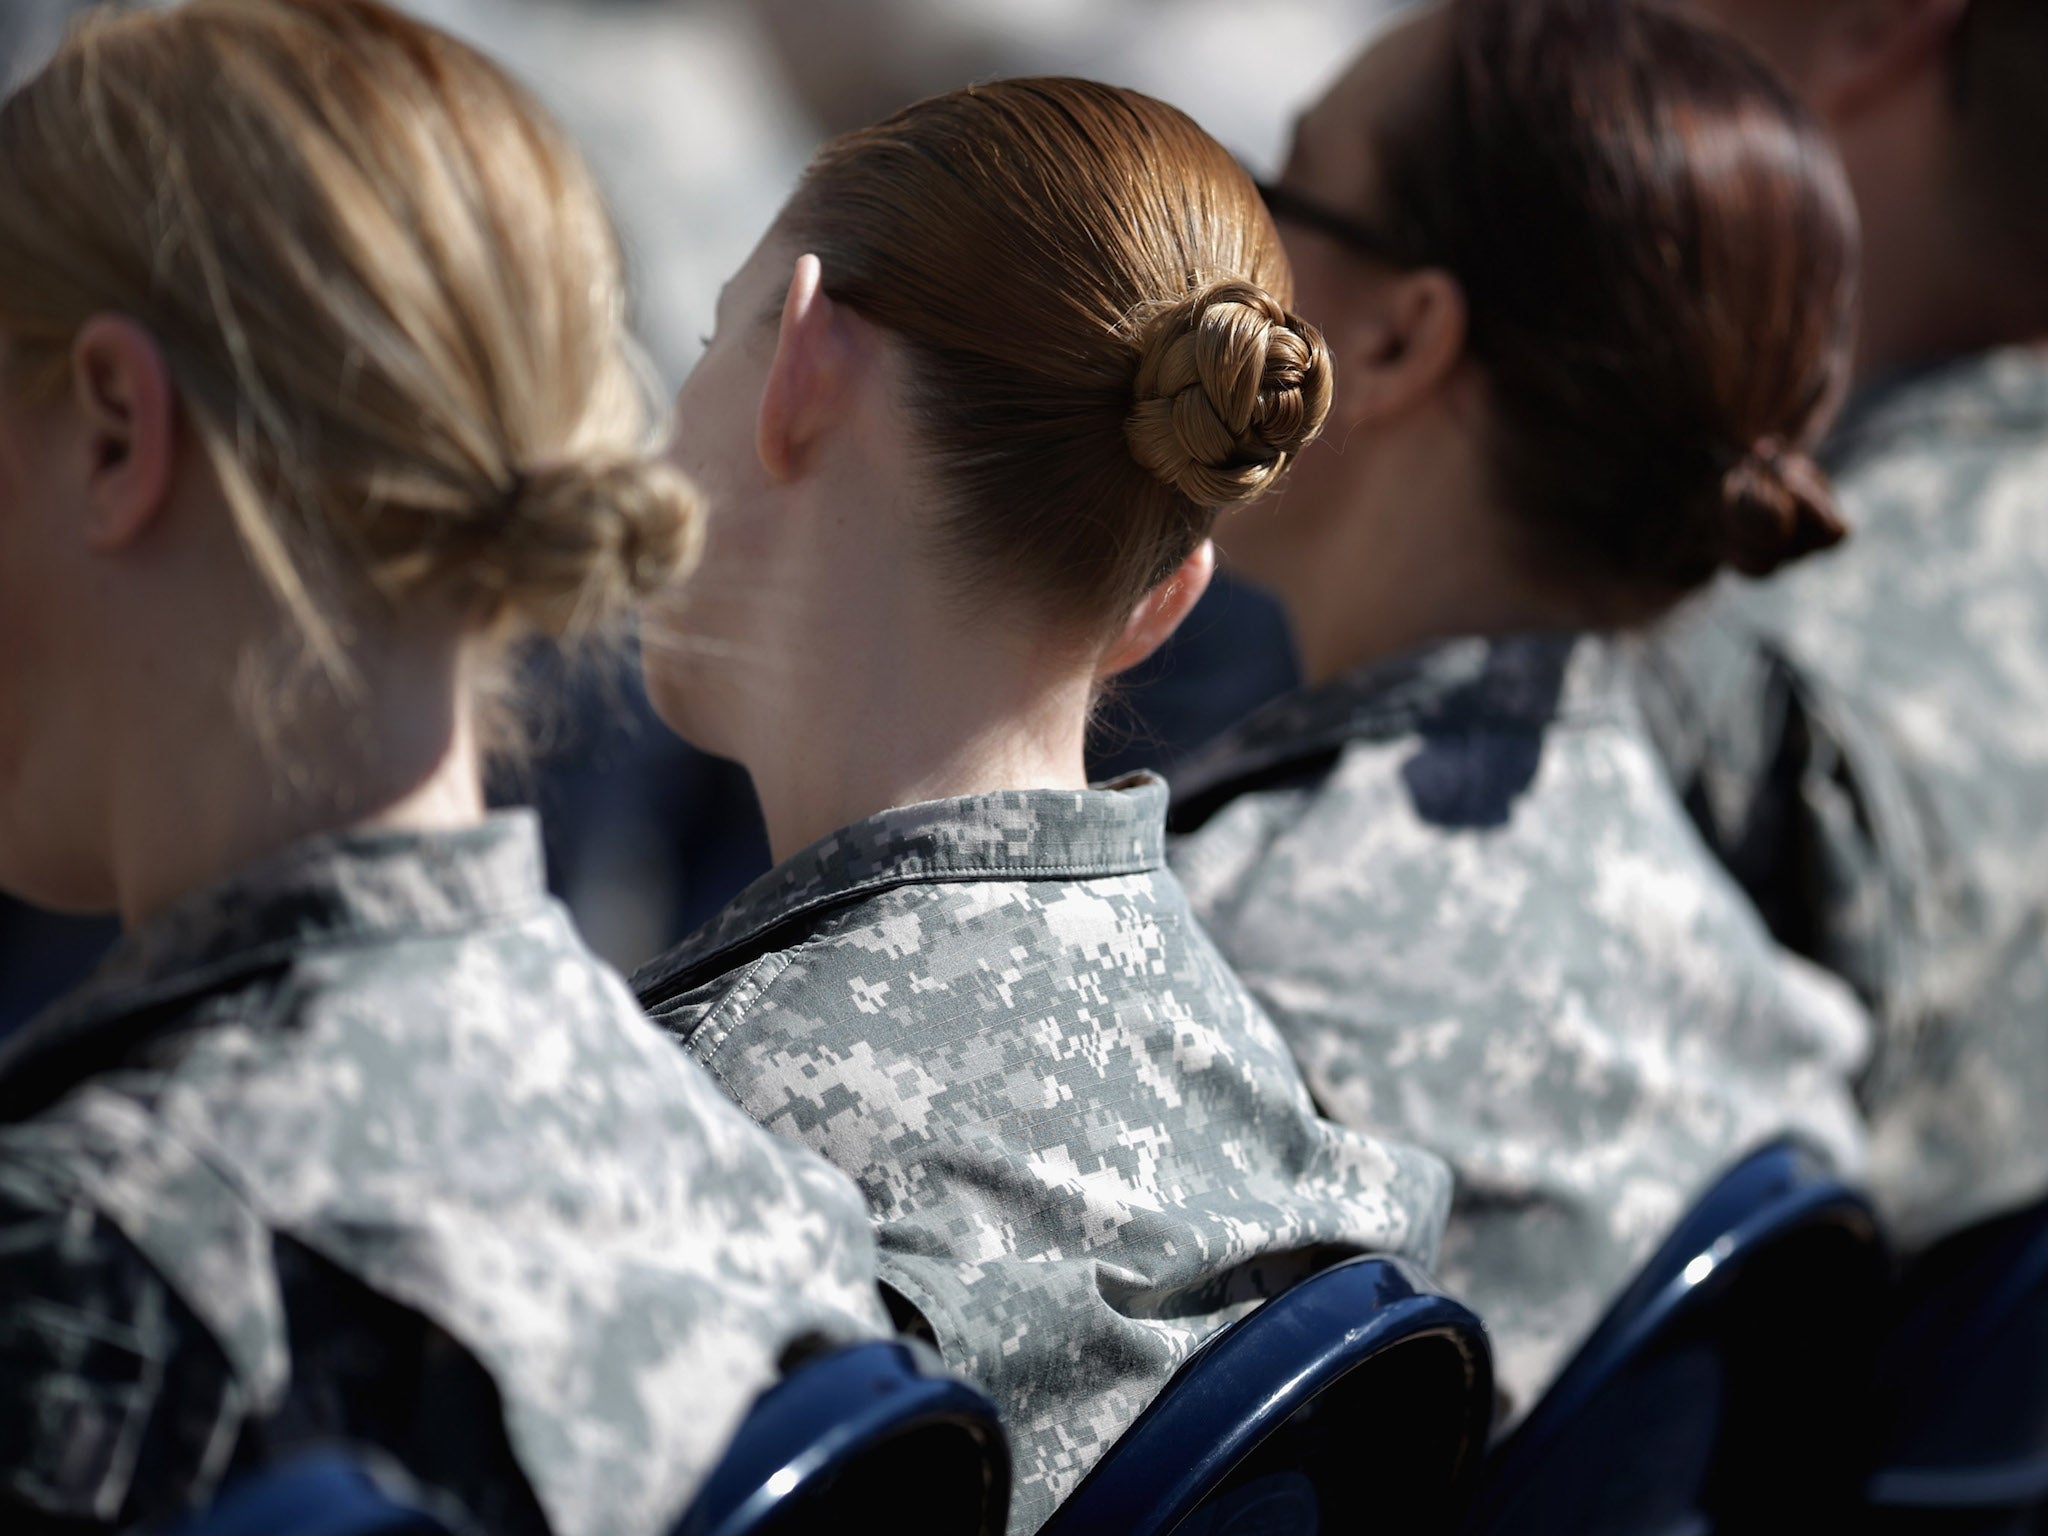 Two U.S. generals have said that they think women should register for the U.S, military draft.